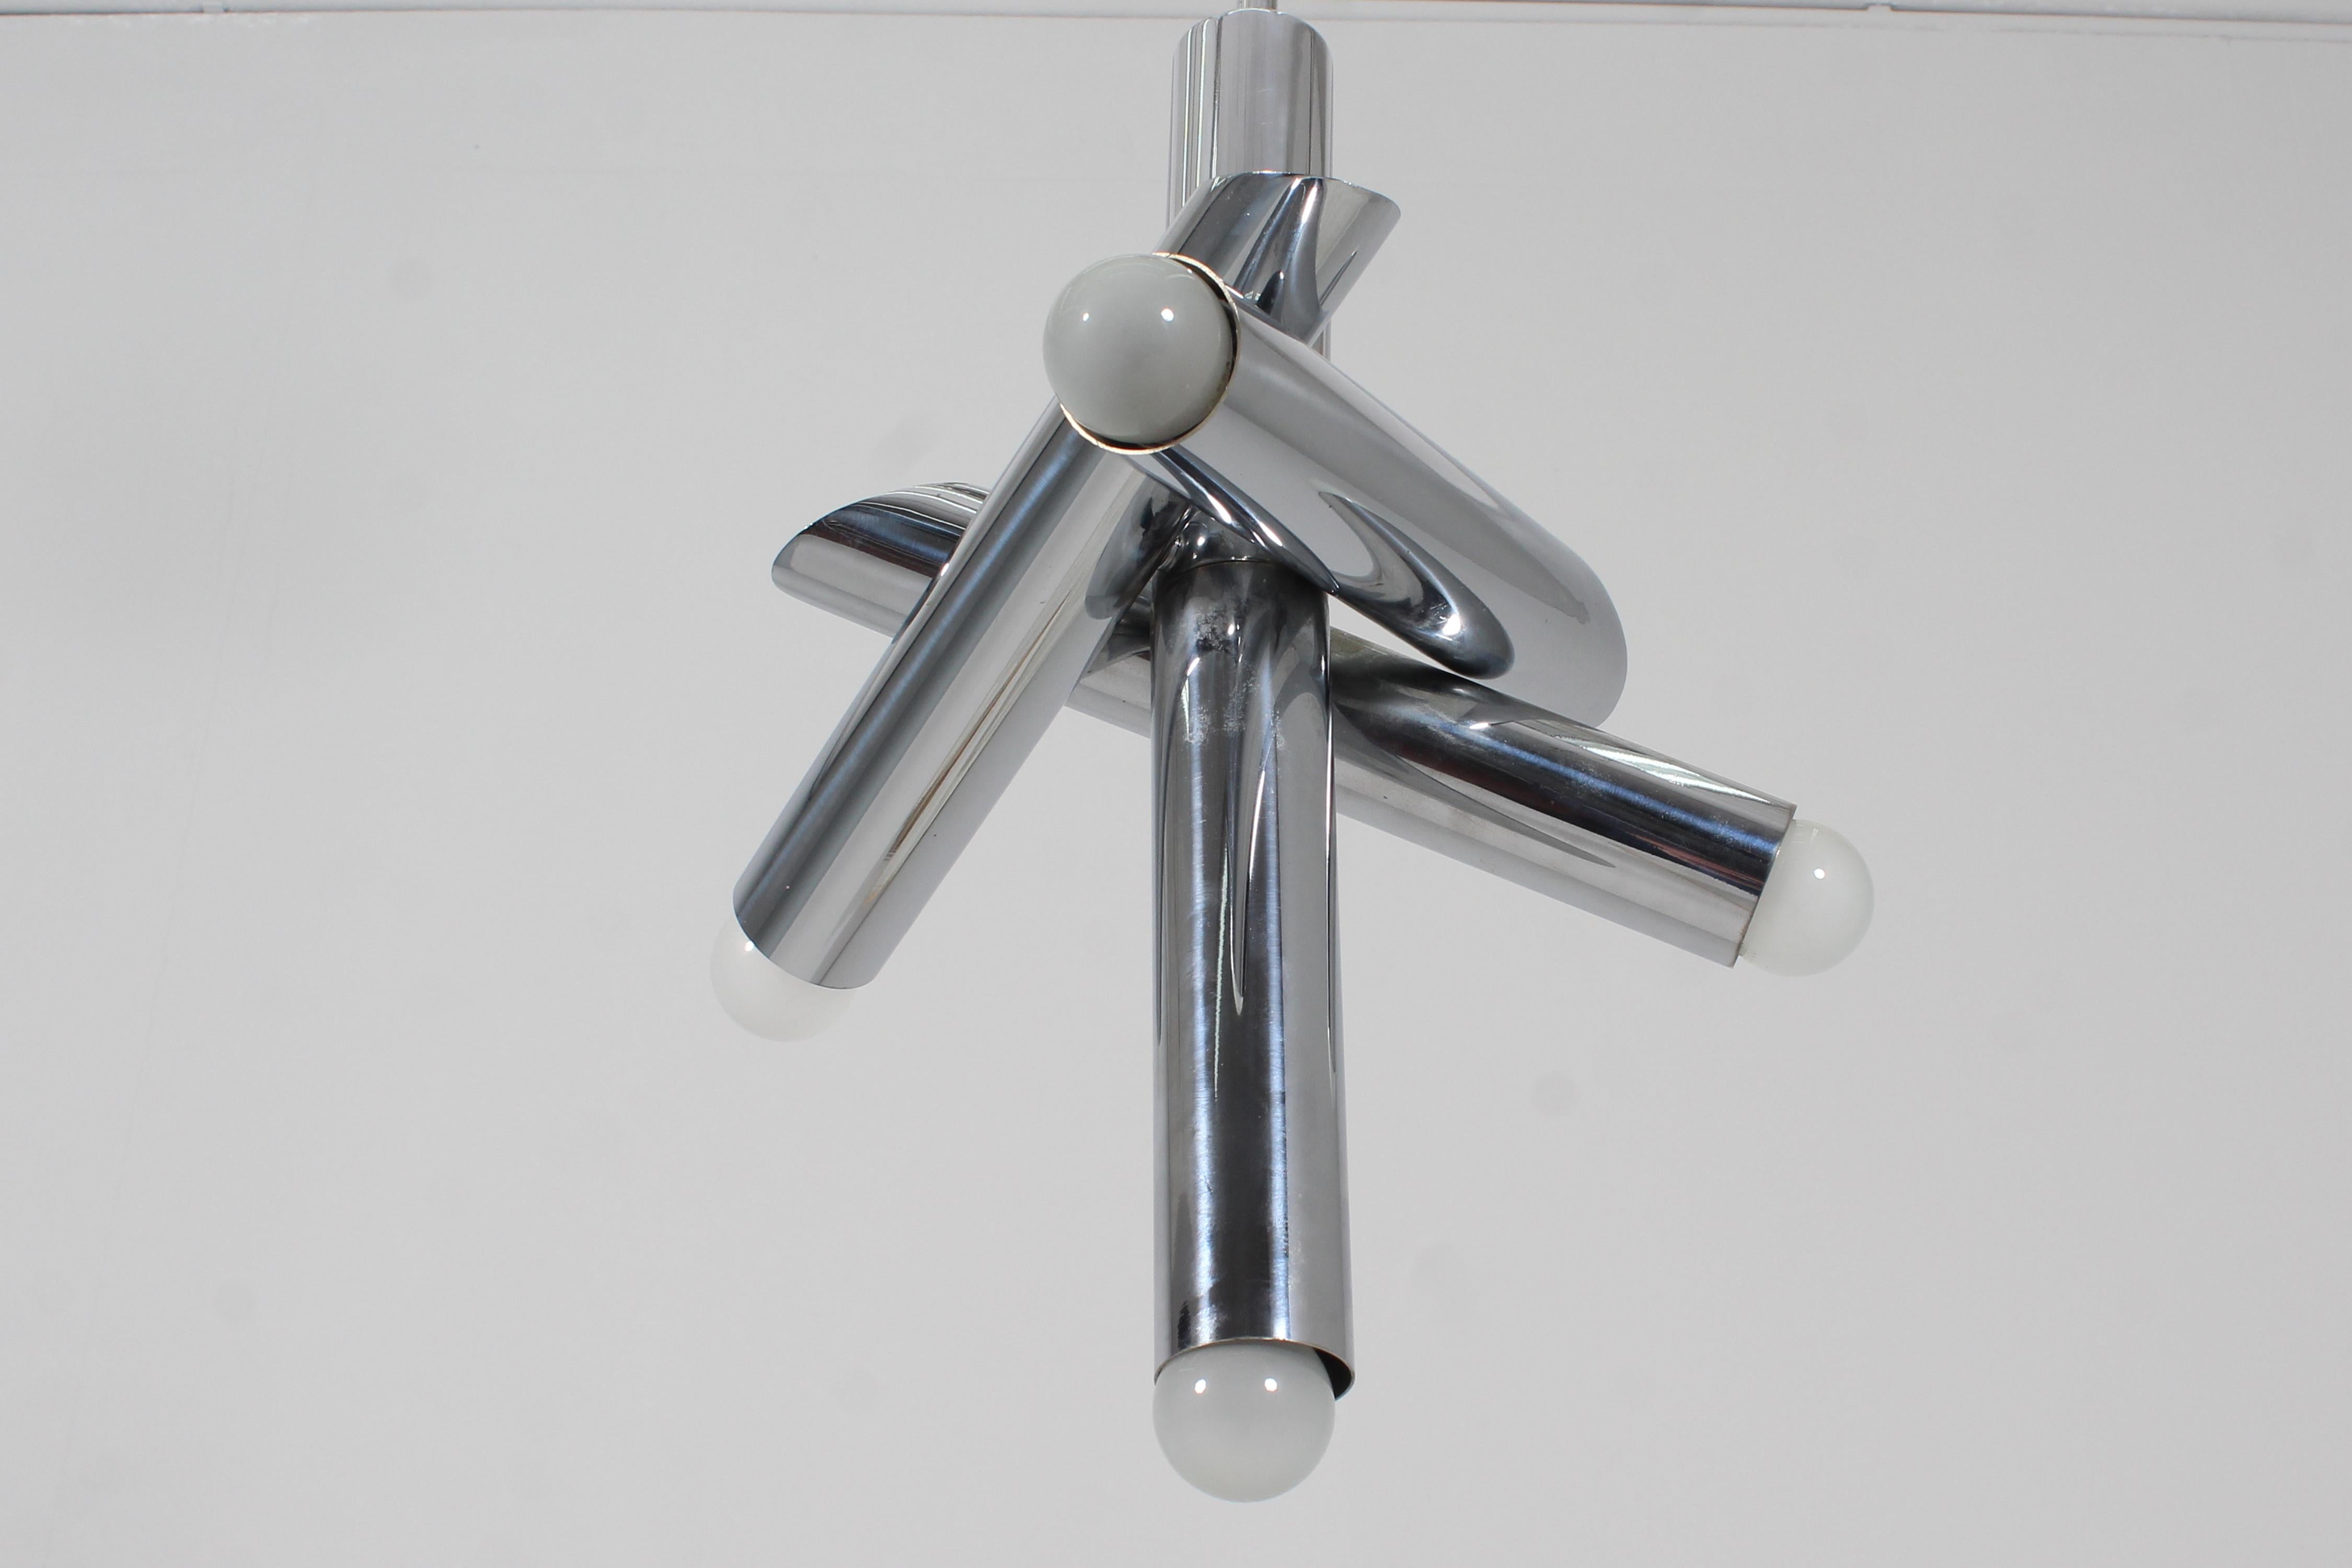 Space Age Reggiani Chromed Steel Adjustable Suspension Lamp 70s Italy For Sale 2